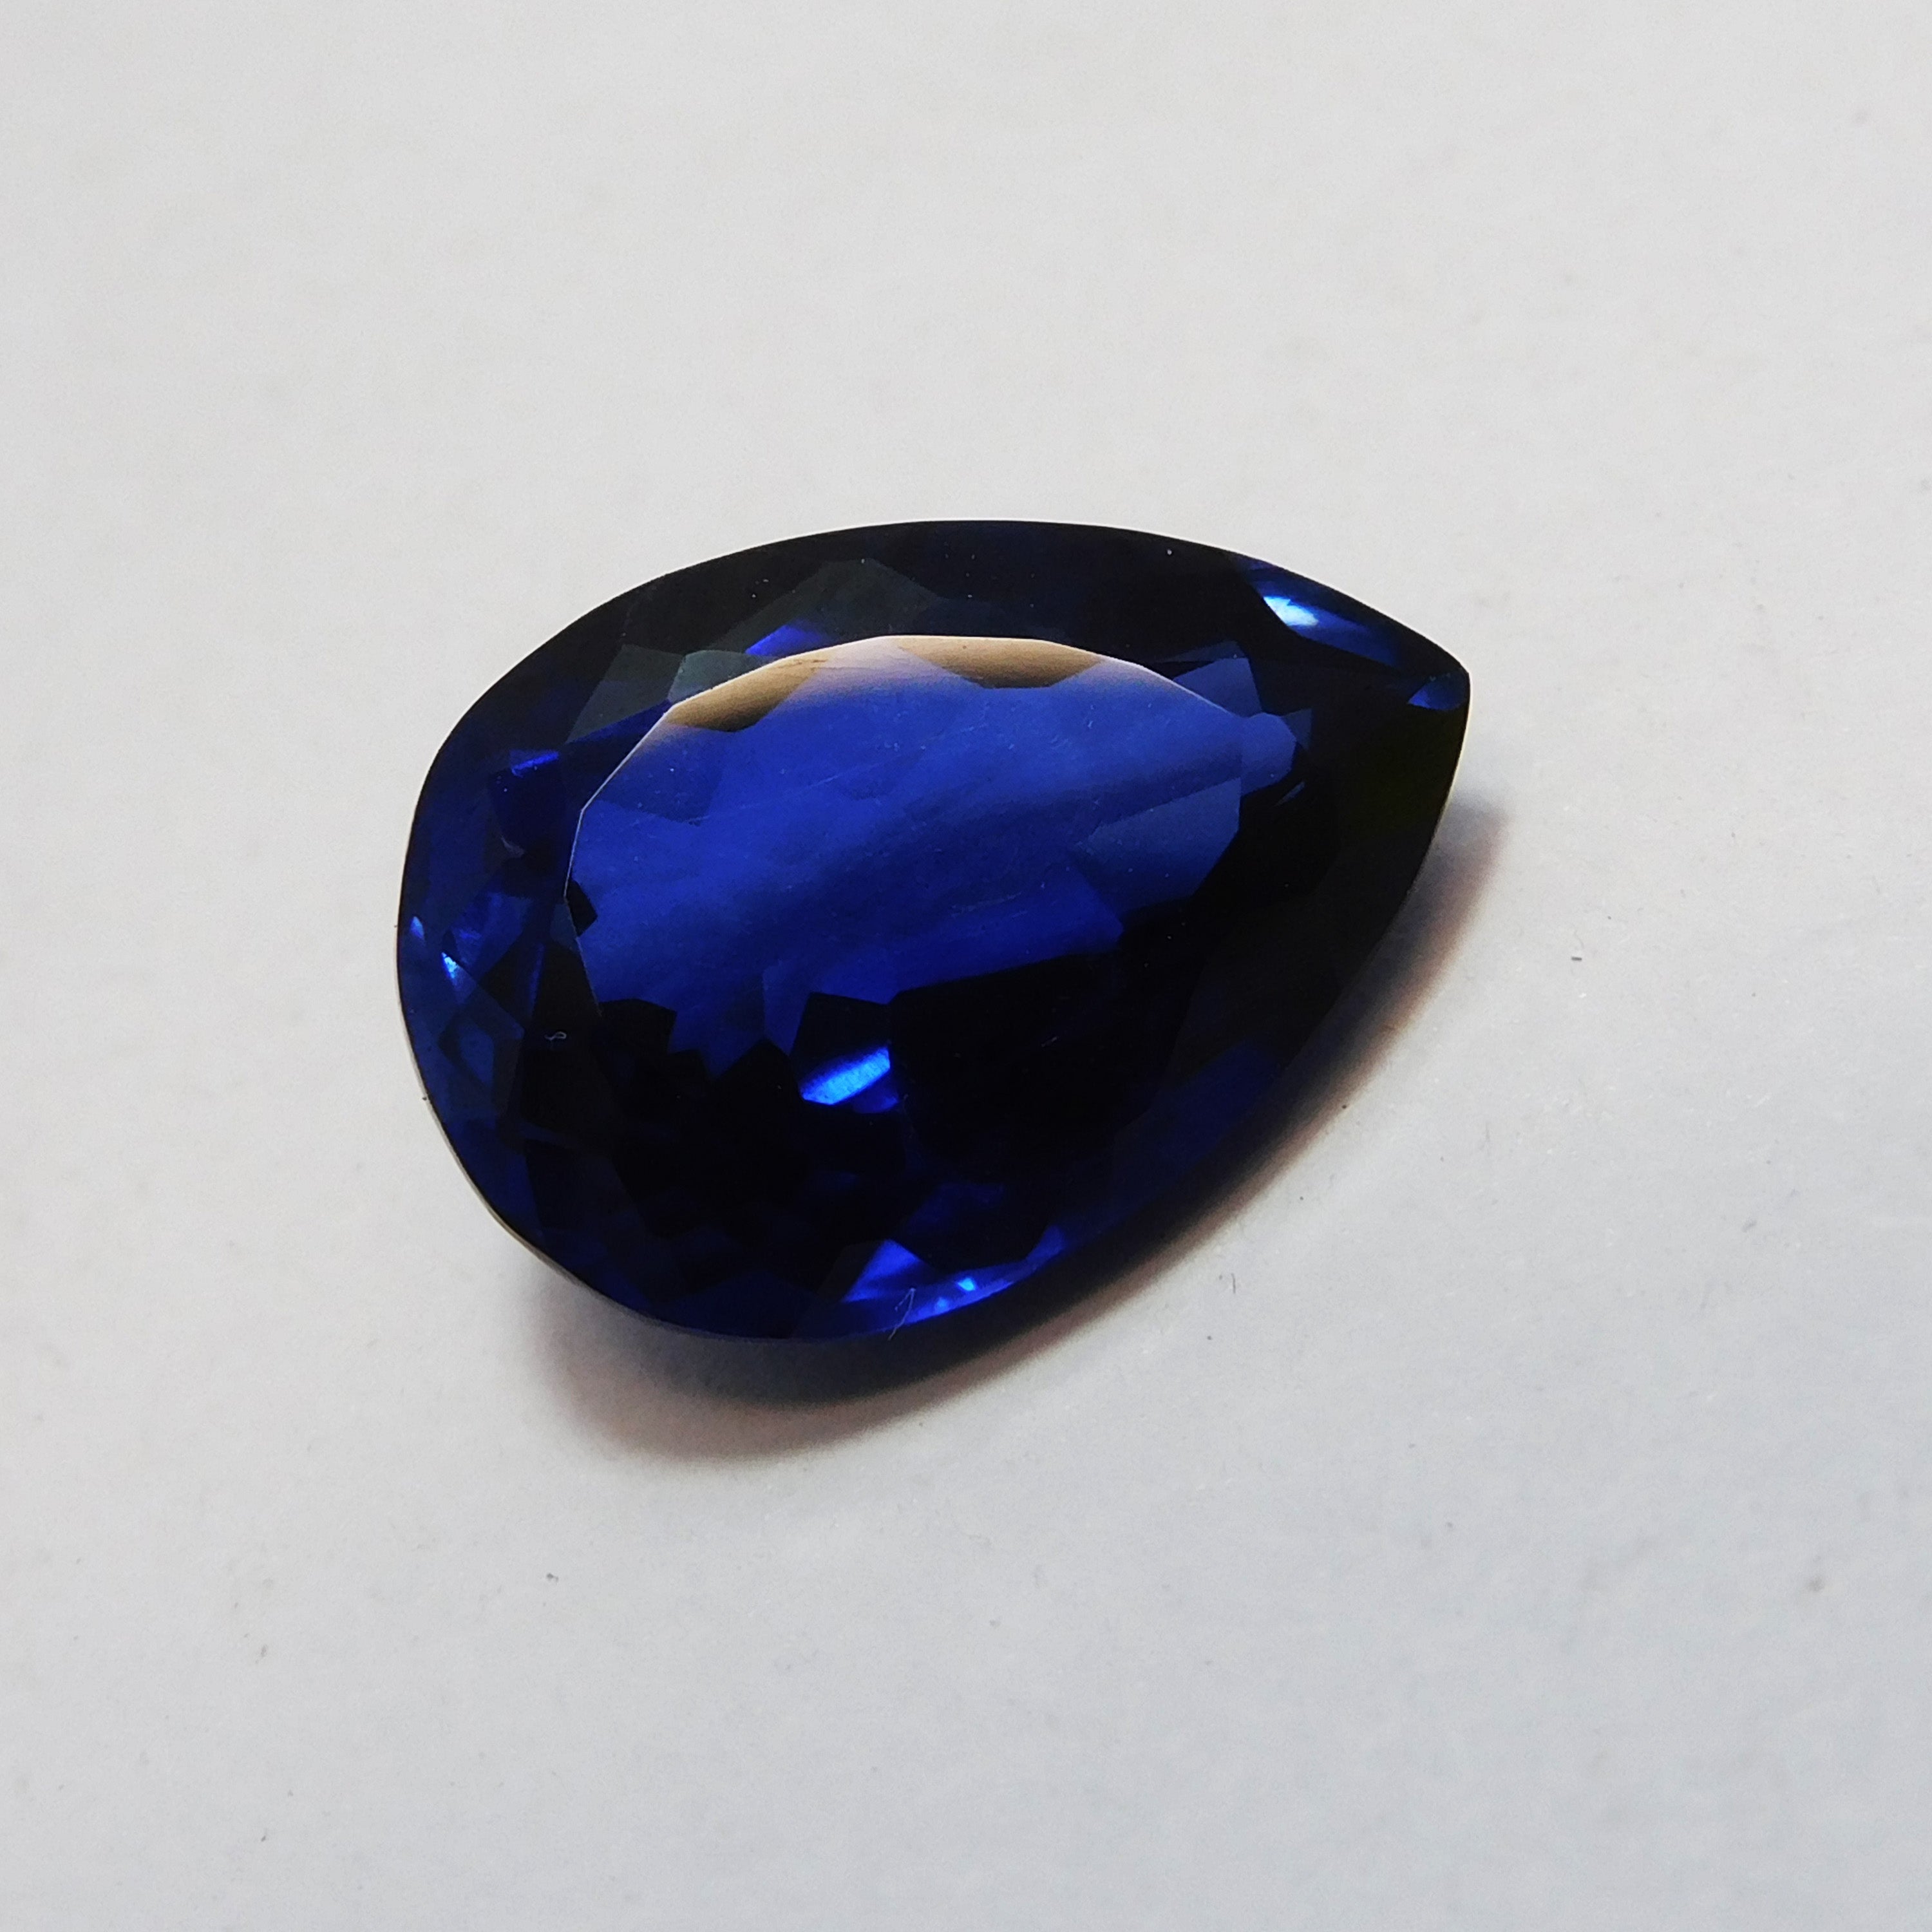 Rare Gemstone 8.74 Carat Blue Color Pear Cut Natural Tanzanite Certified Loose Gemstone | Best Offer | Gift For Her /Him